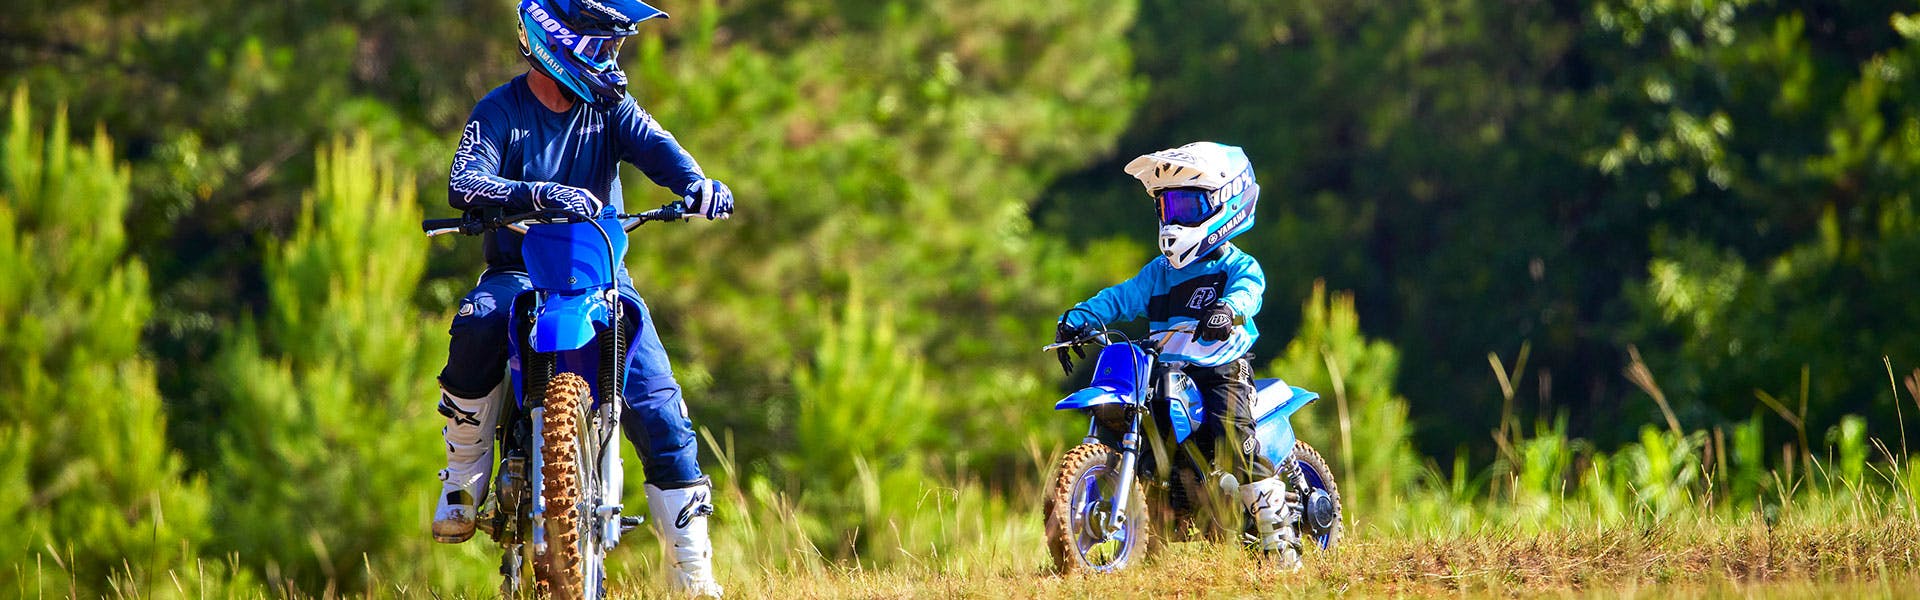 Yamaha PW50 in team yamaha blue colour, being ridden off-track